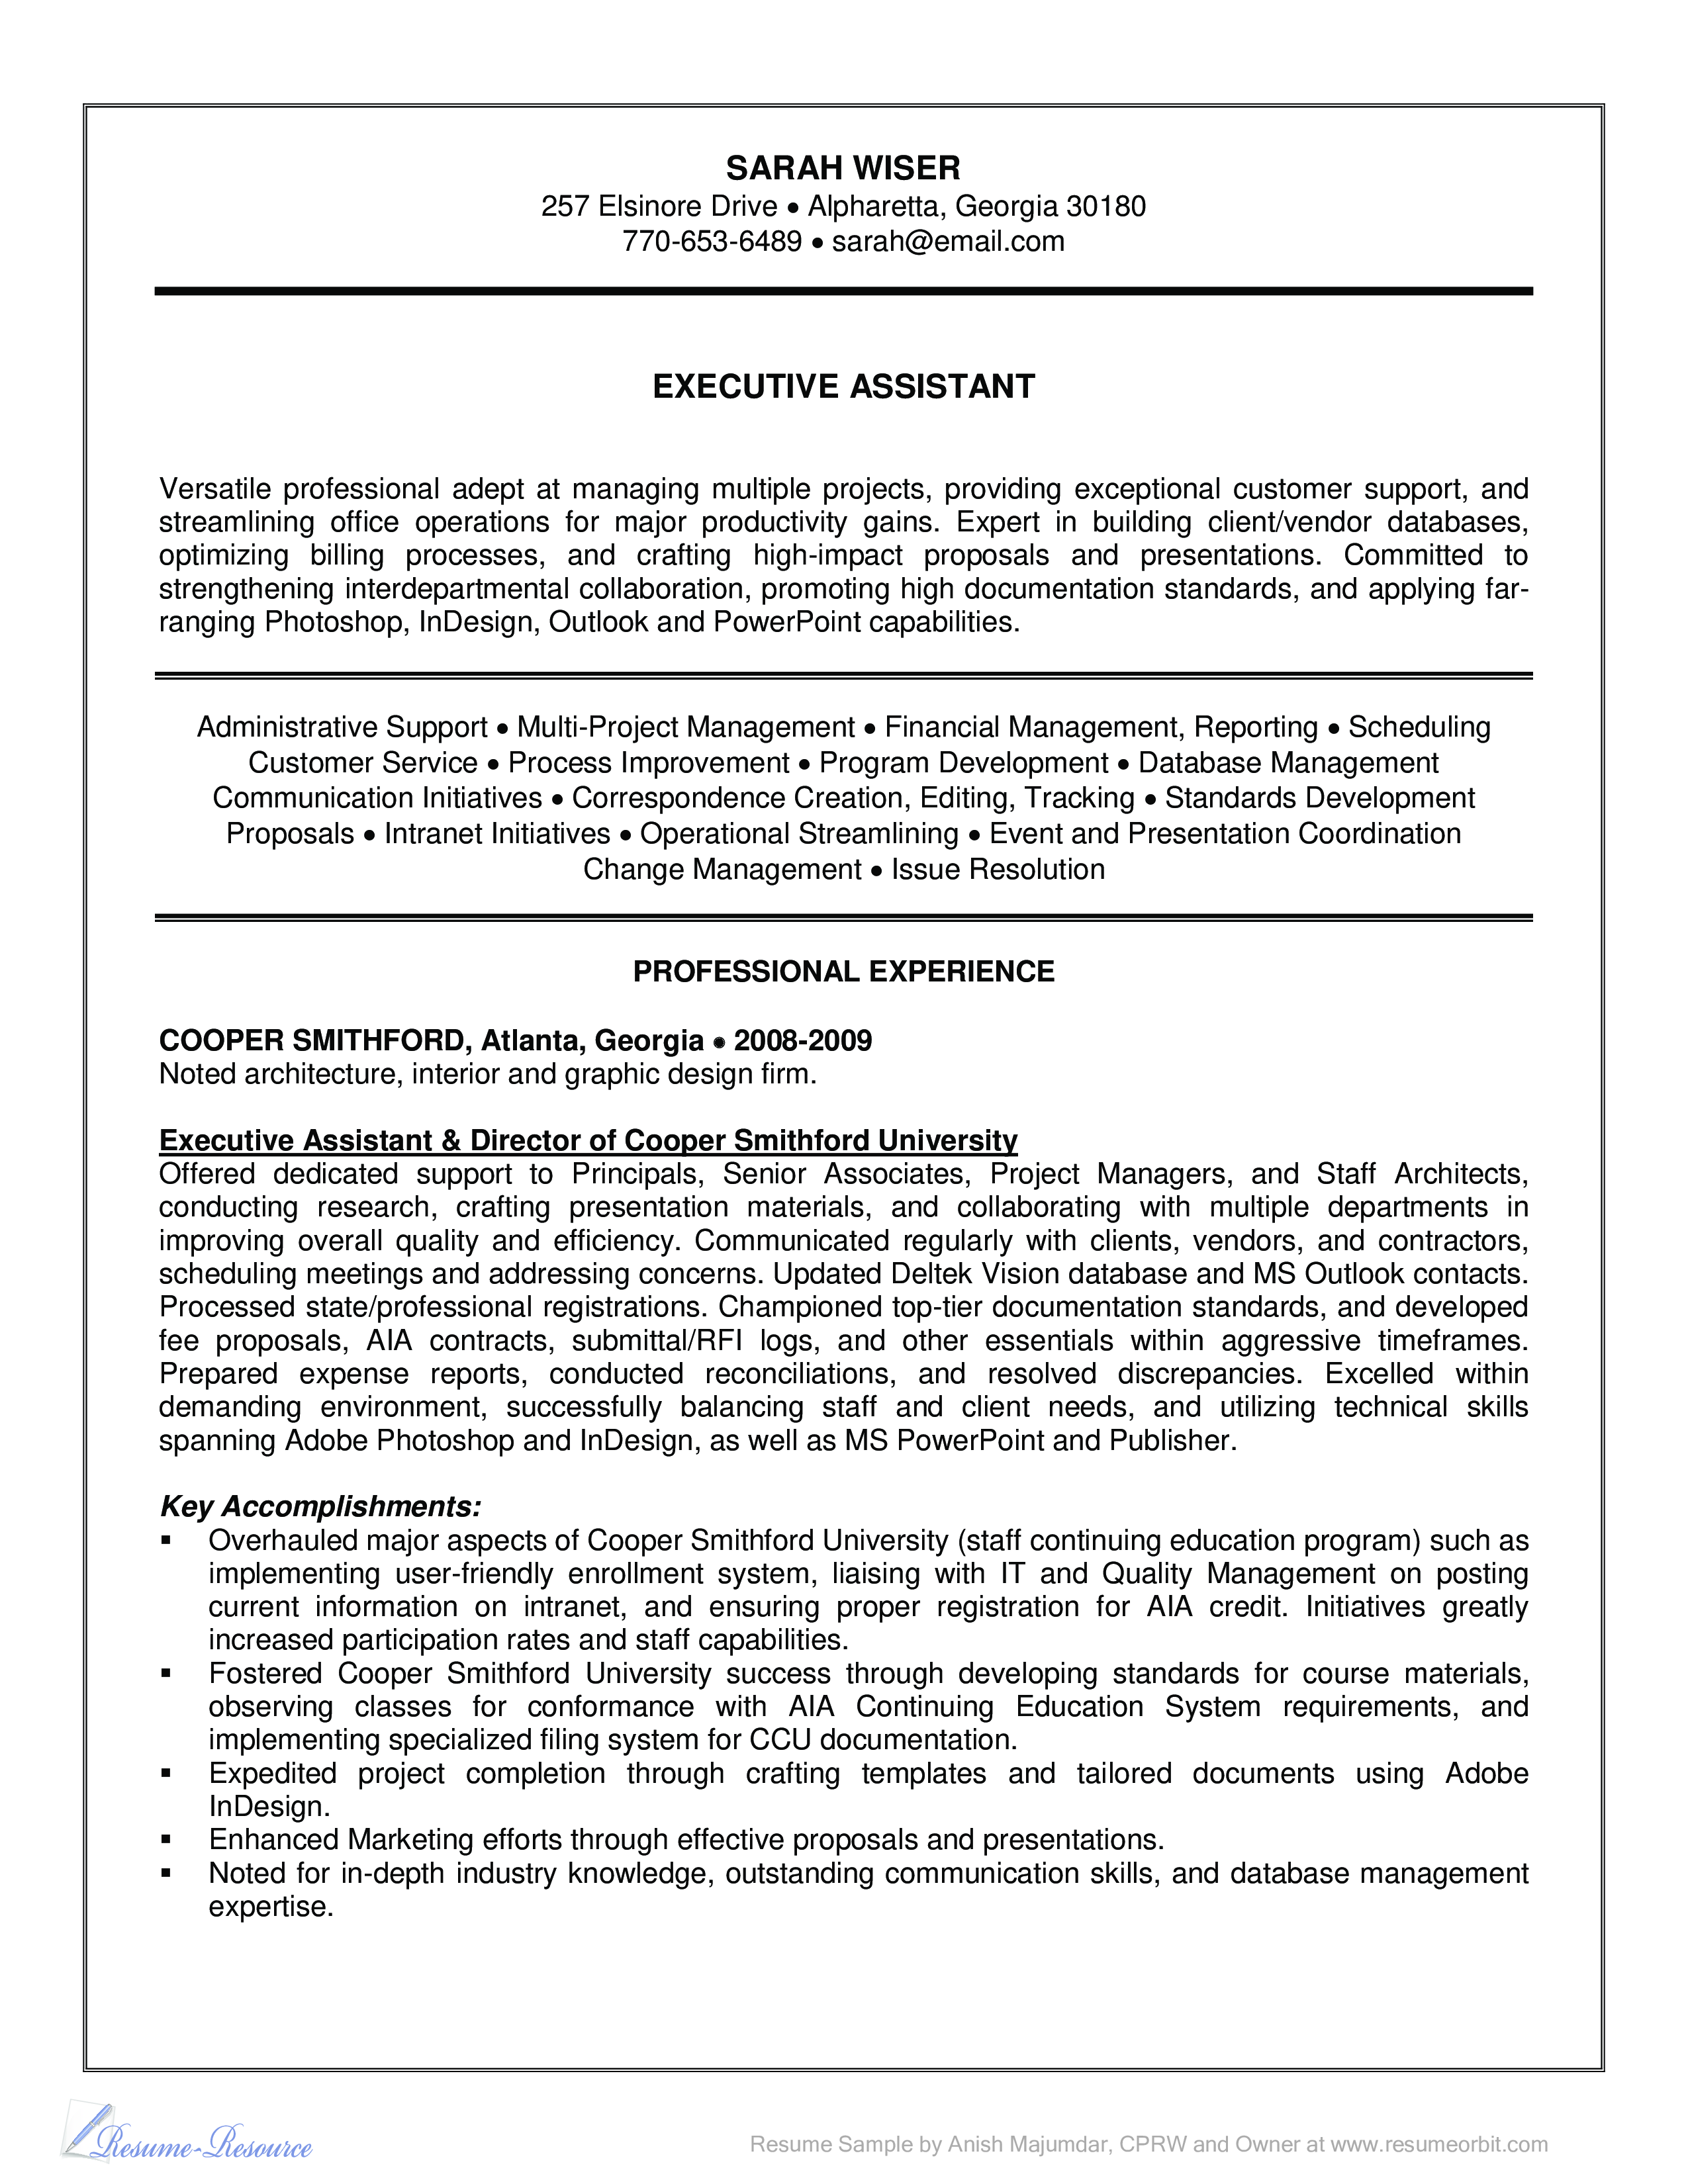 free resume templates with professional summary